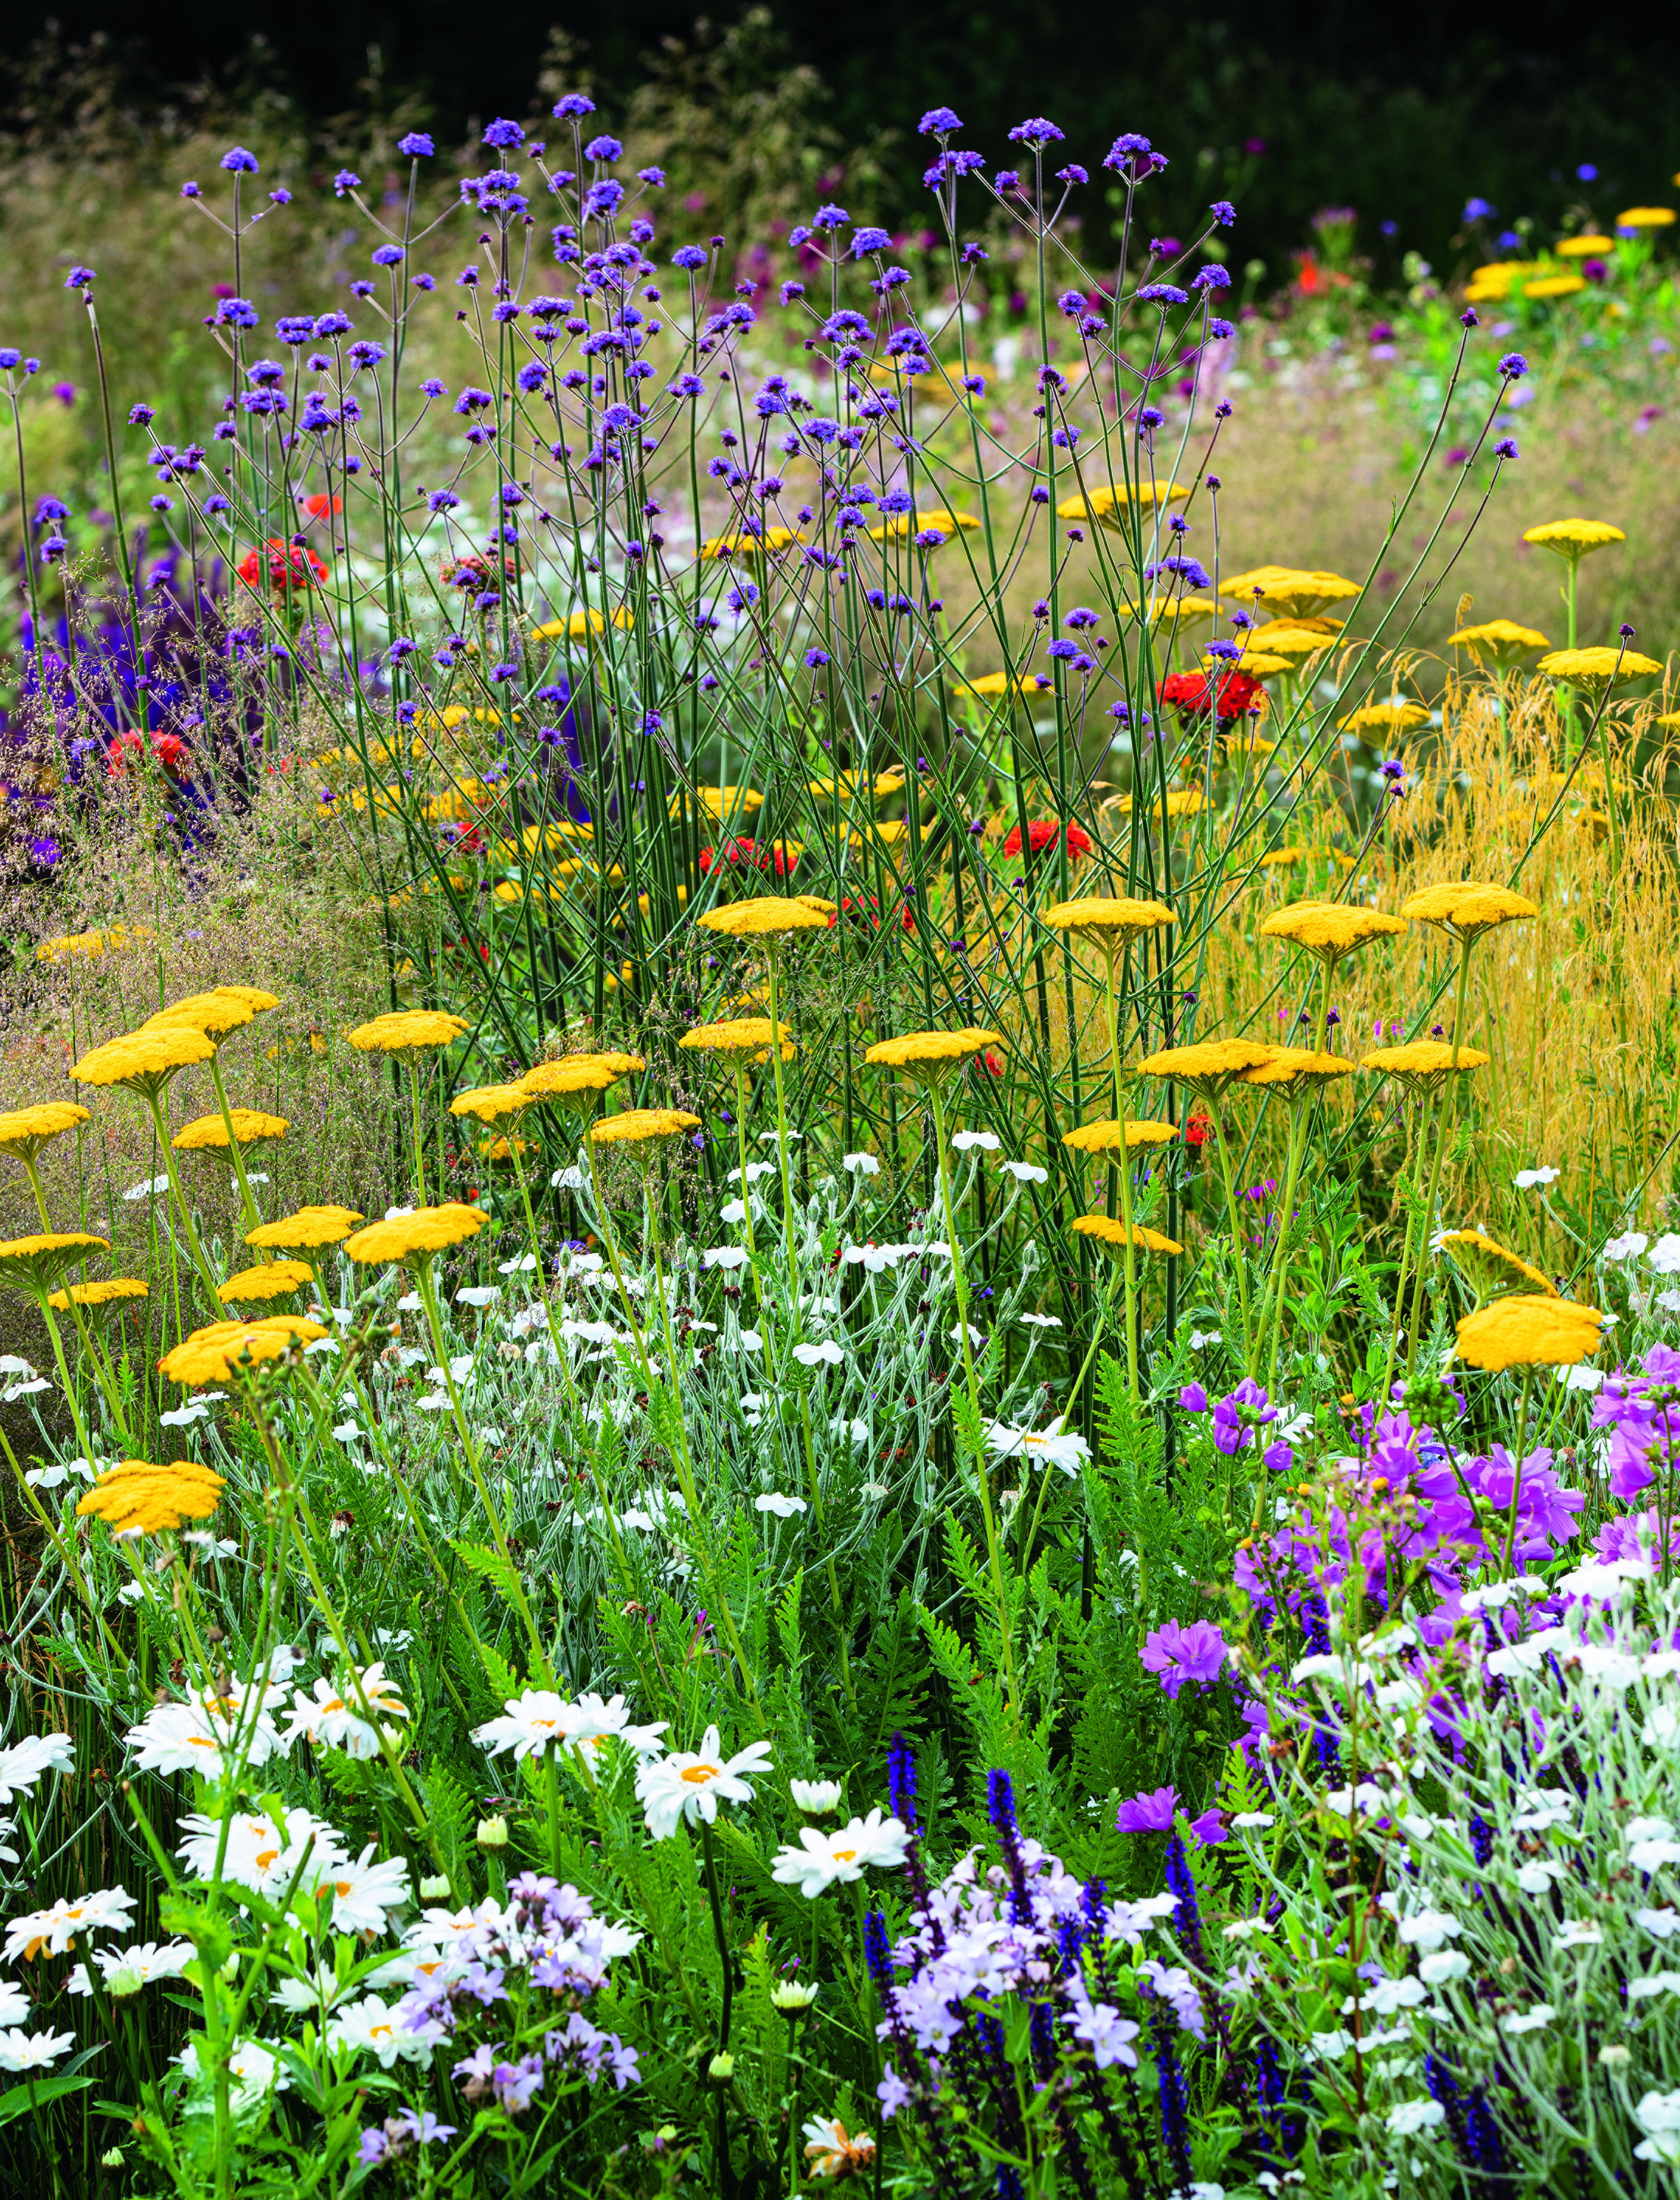 Summer Reads: This what high summer should look like in your flower beds, according to one of the world's best garden writers